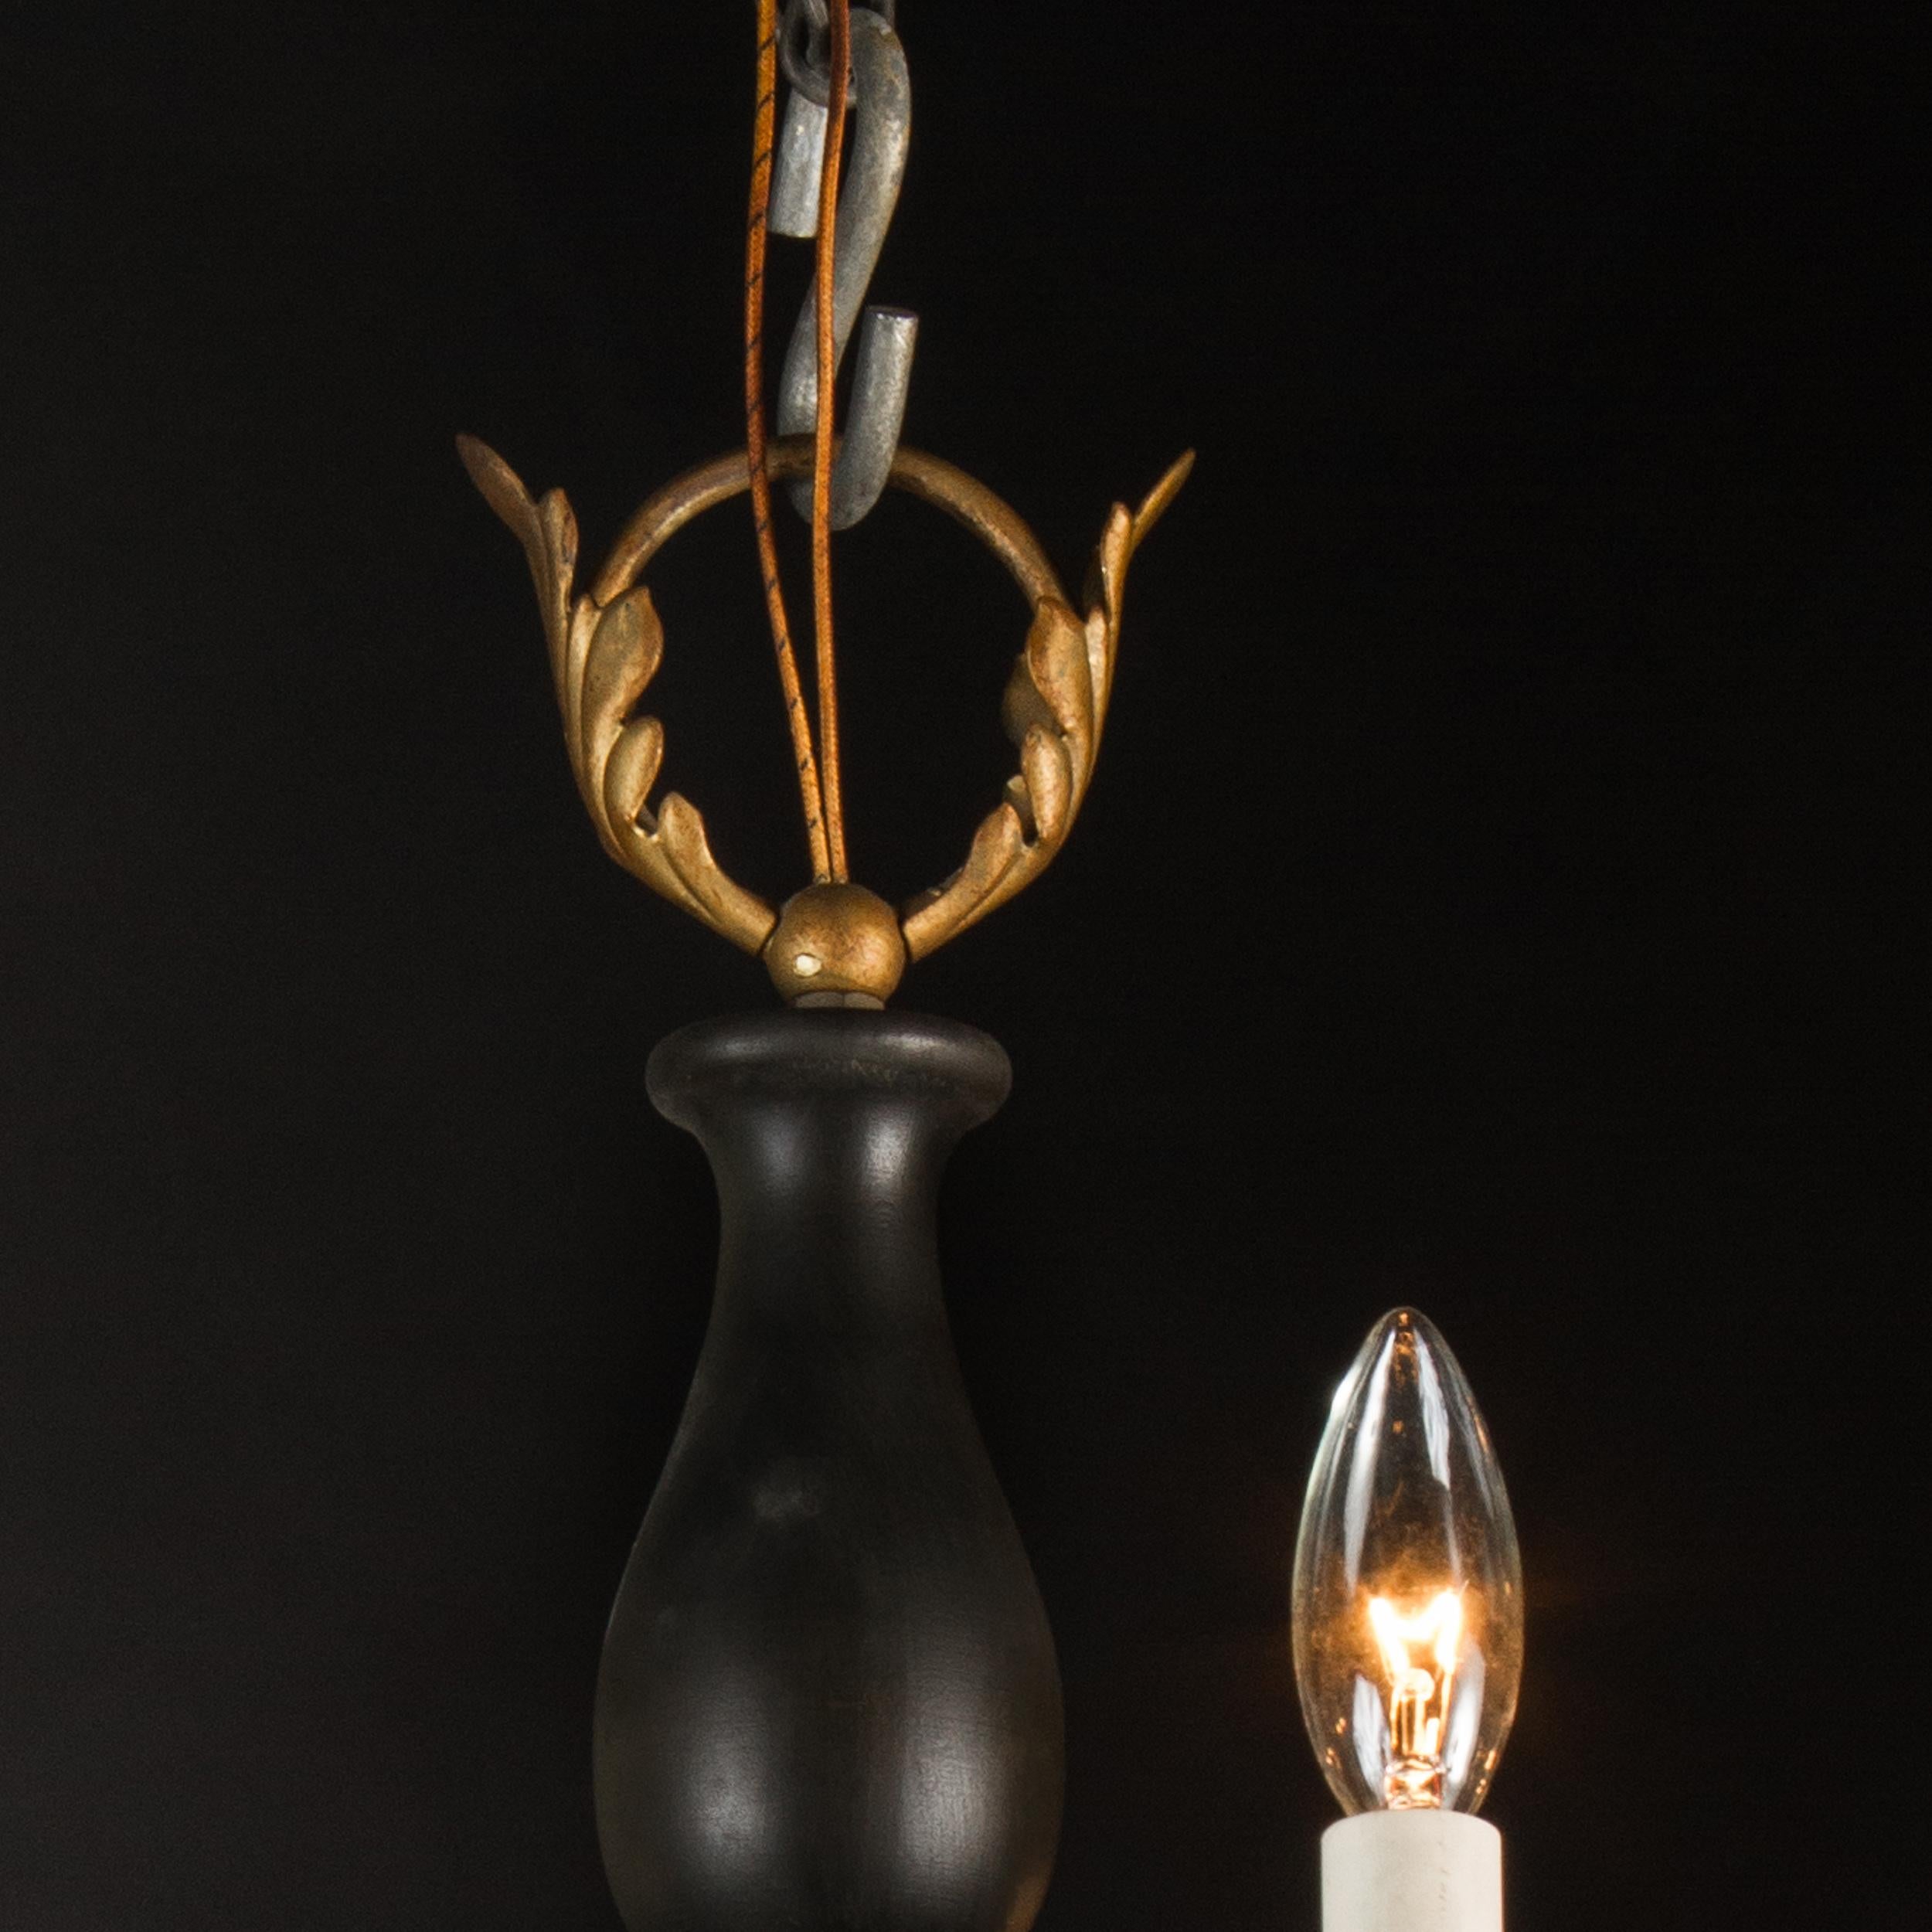 Black and Gold Wood Chandelier with Iron and Tole, Italian Mid-20th Century For Sale 1